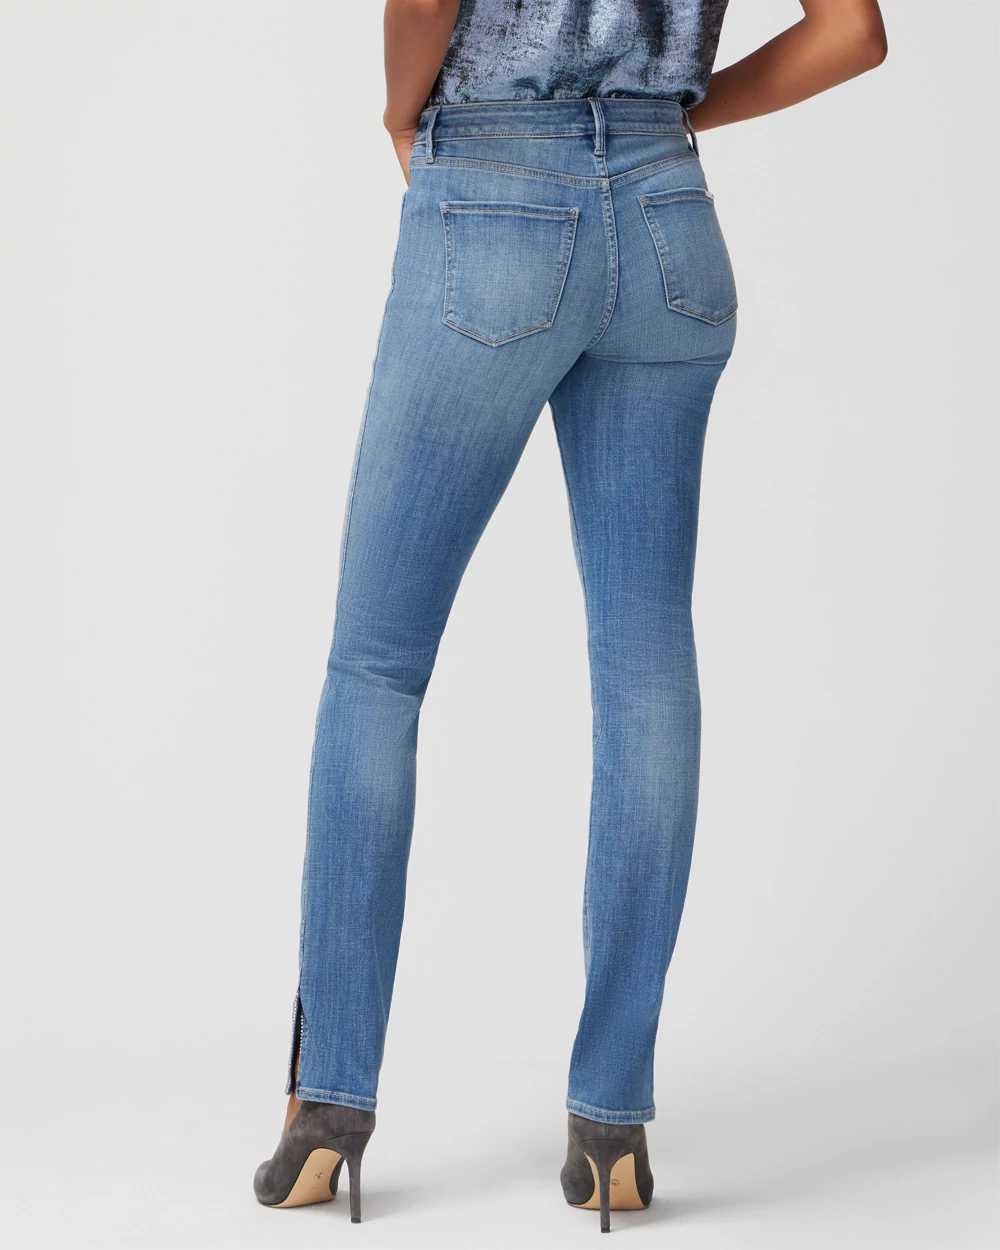 High-Rise Everyday Soft Novelty Slim Jeans With Slit click to view larger image.